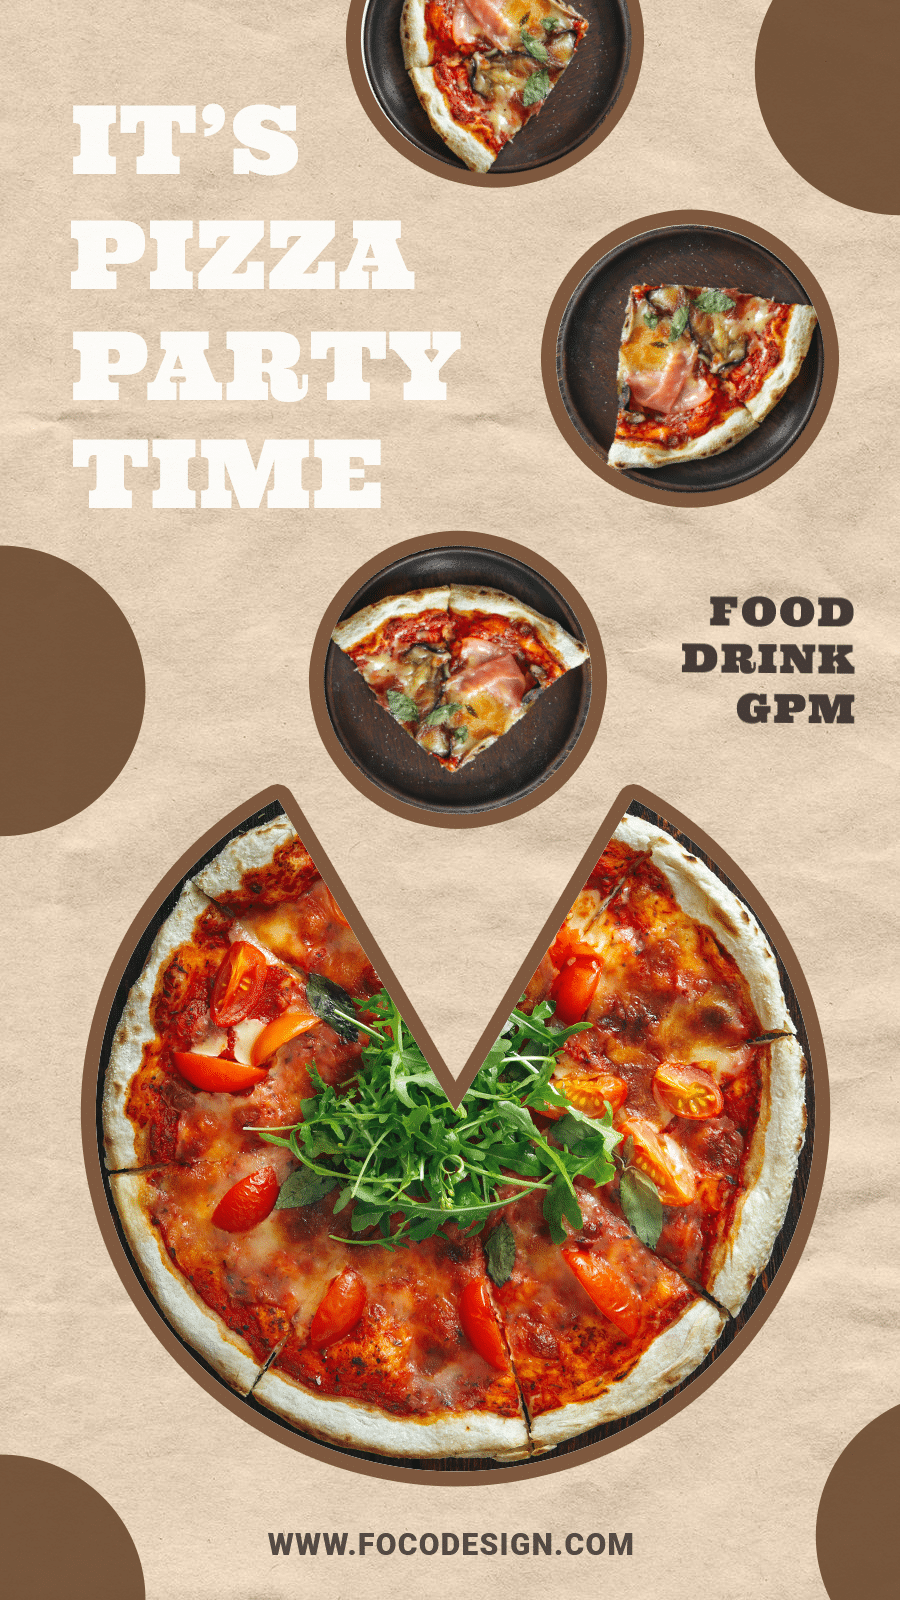 Fashion Pizza Party Time Ecommerce Story预览效果